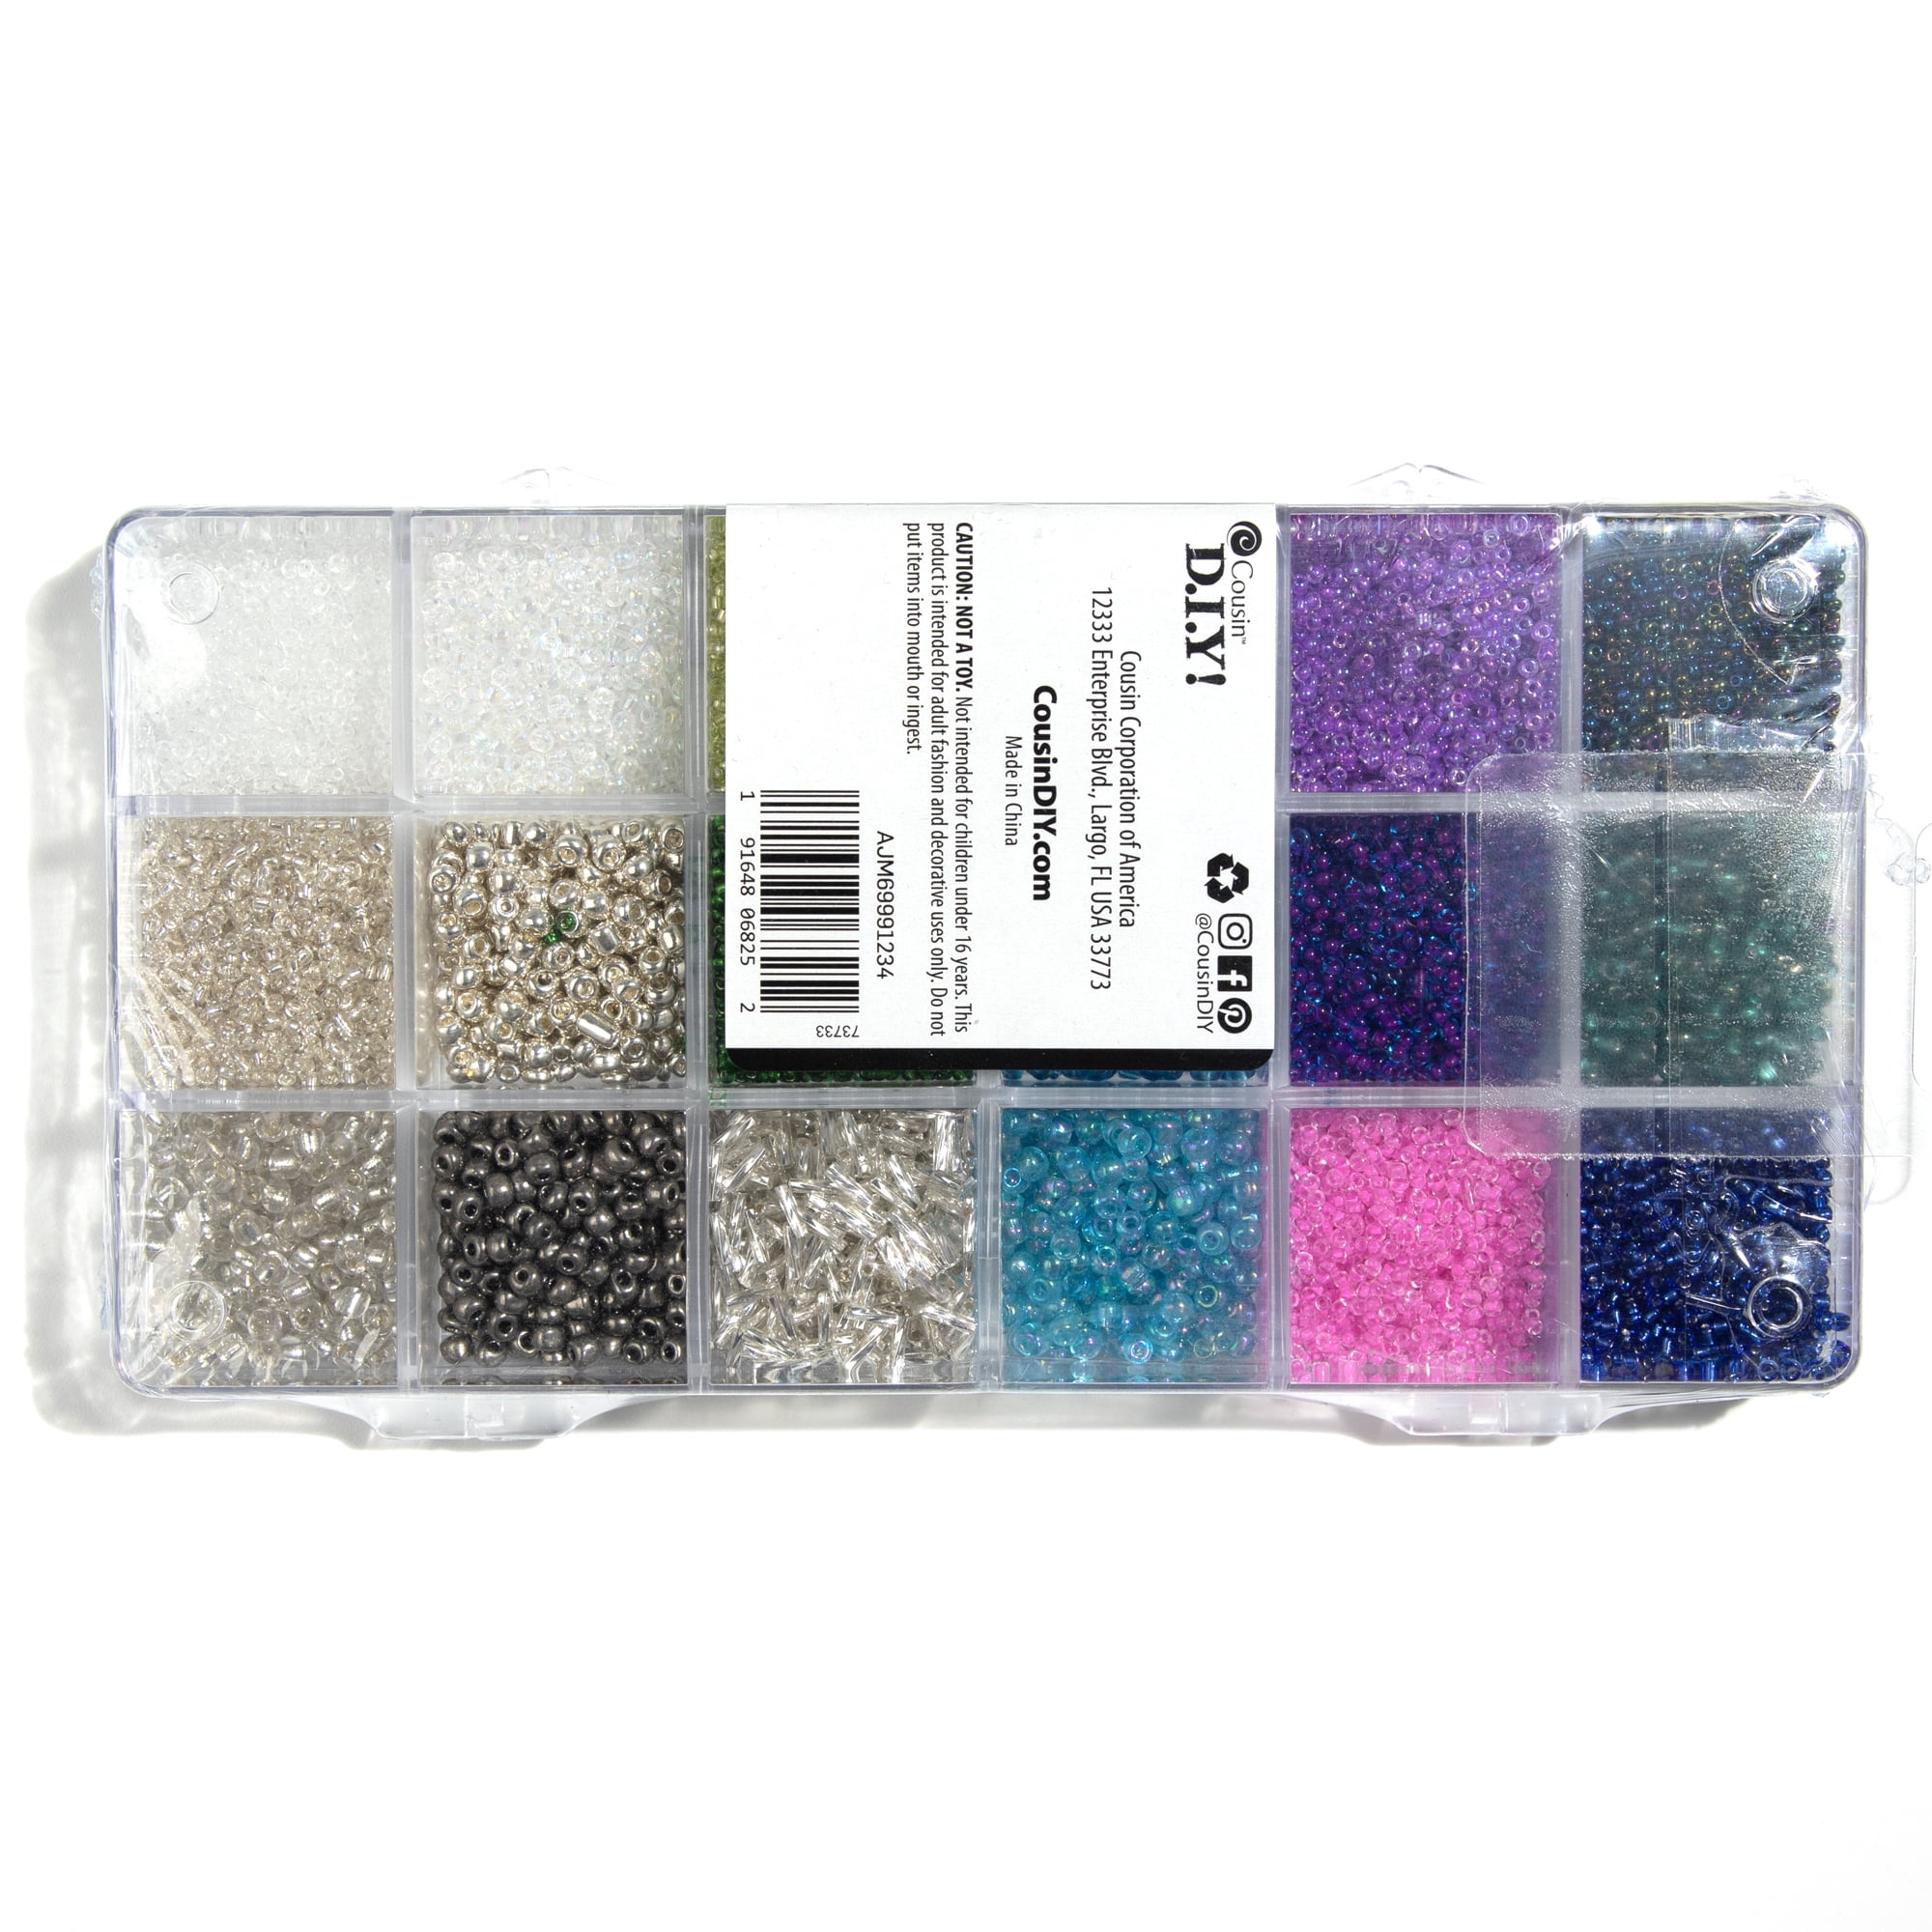 Cousin DIY Mega Tub Glass Seed Beads Jewelry Making Kit, Multi-Colored,  500g Beads, Unisex, 25,000+ Pieces